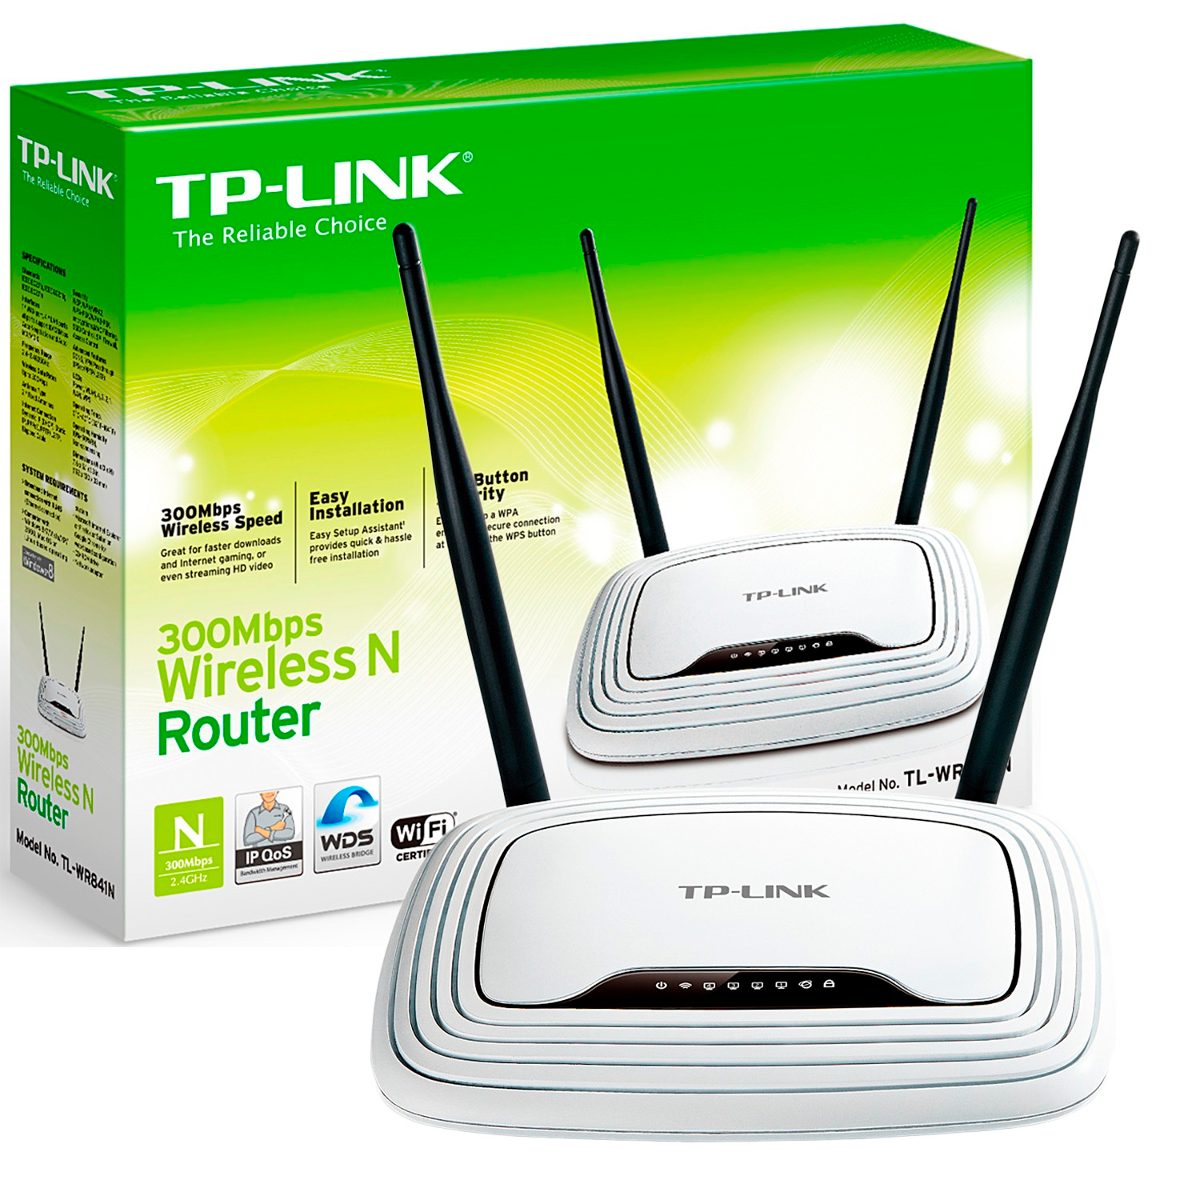 TP-LINK WR841ND 300M Wireless N Router, 2 Non-Detachable Antennas 2T2R, Atheros 2.4GHz 802.1